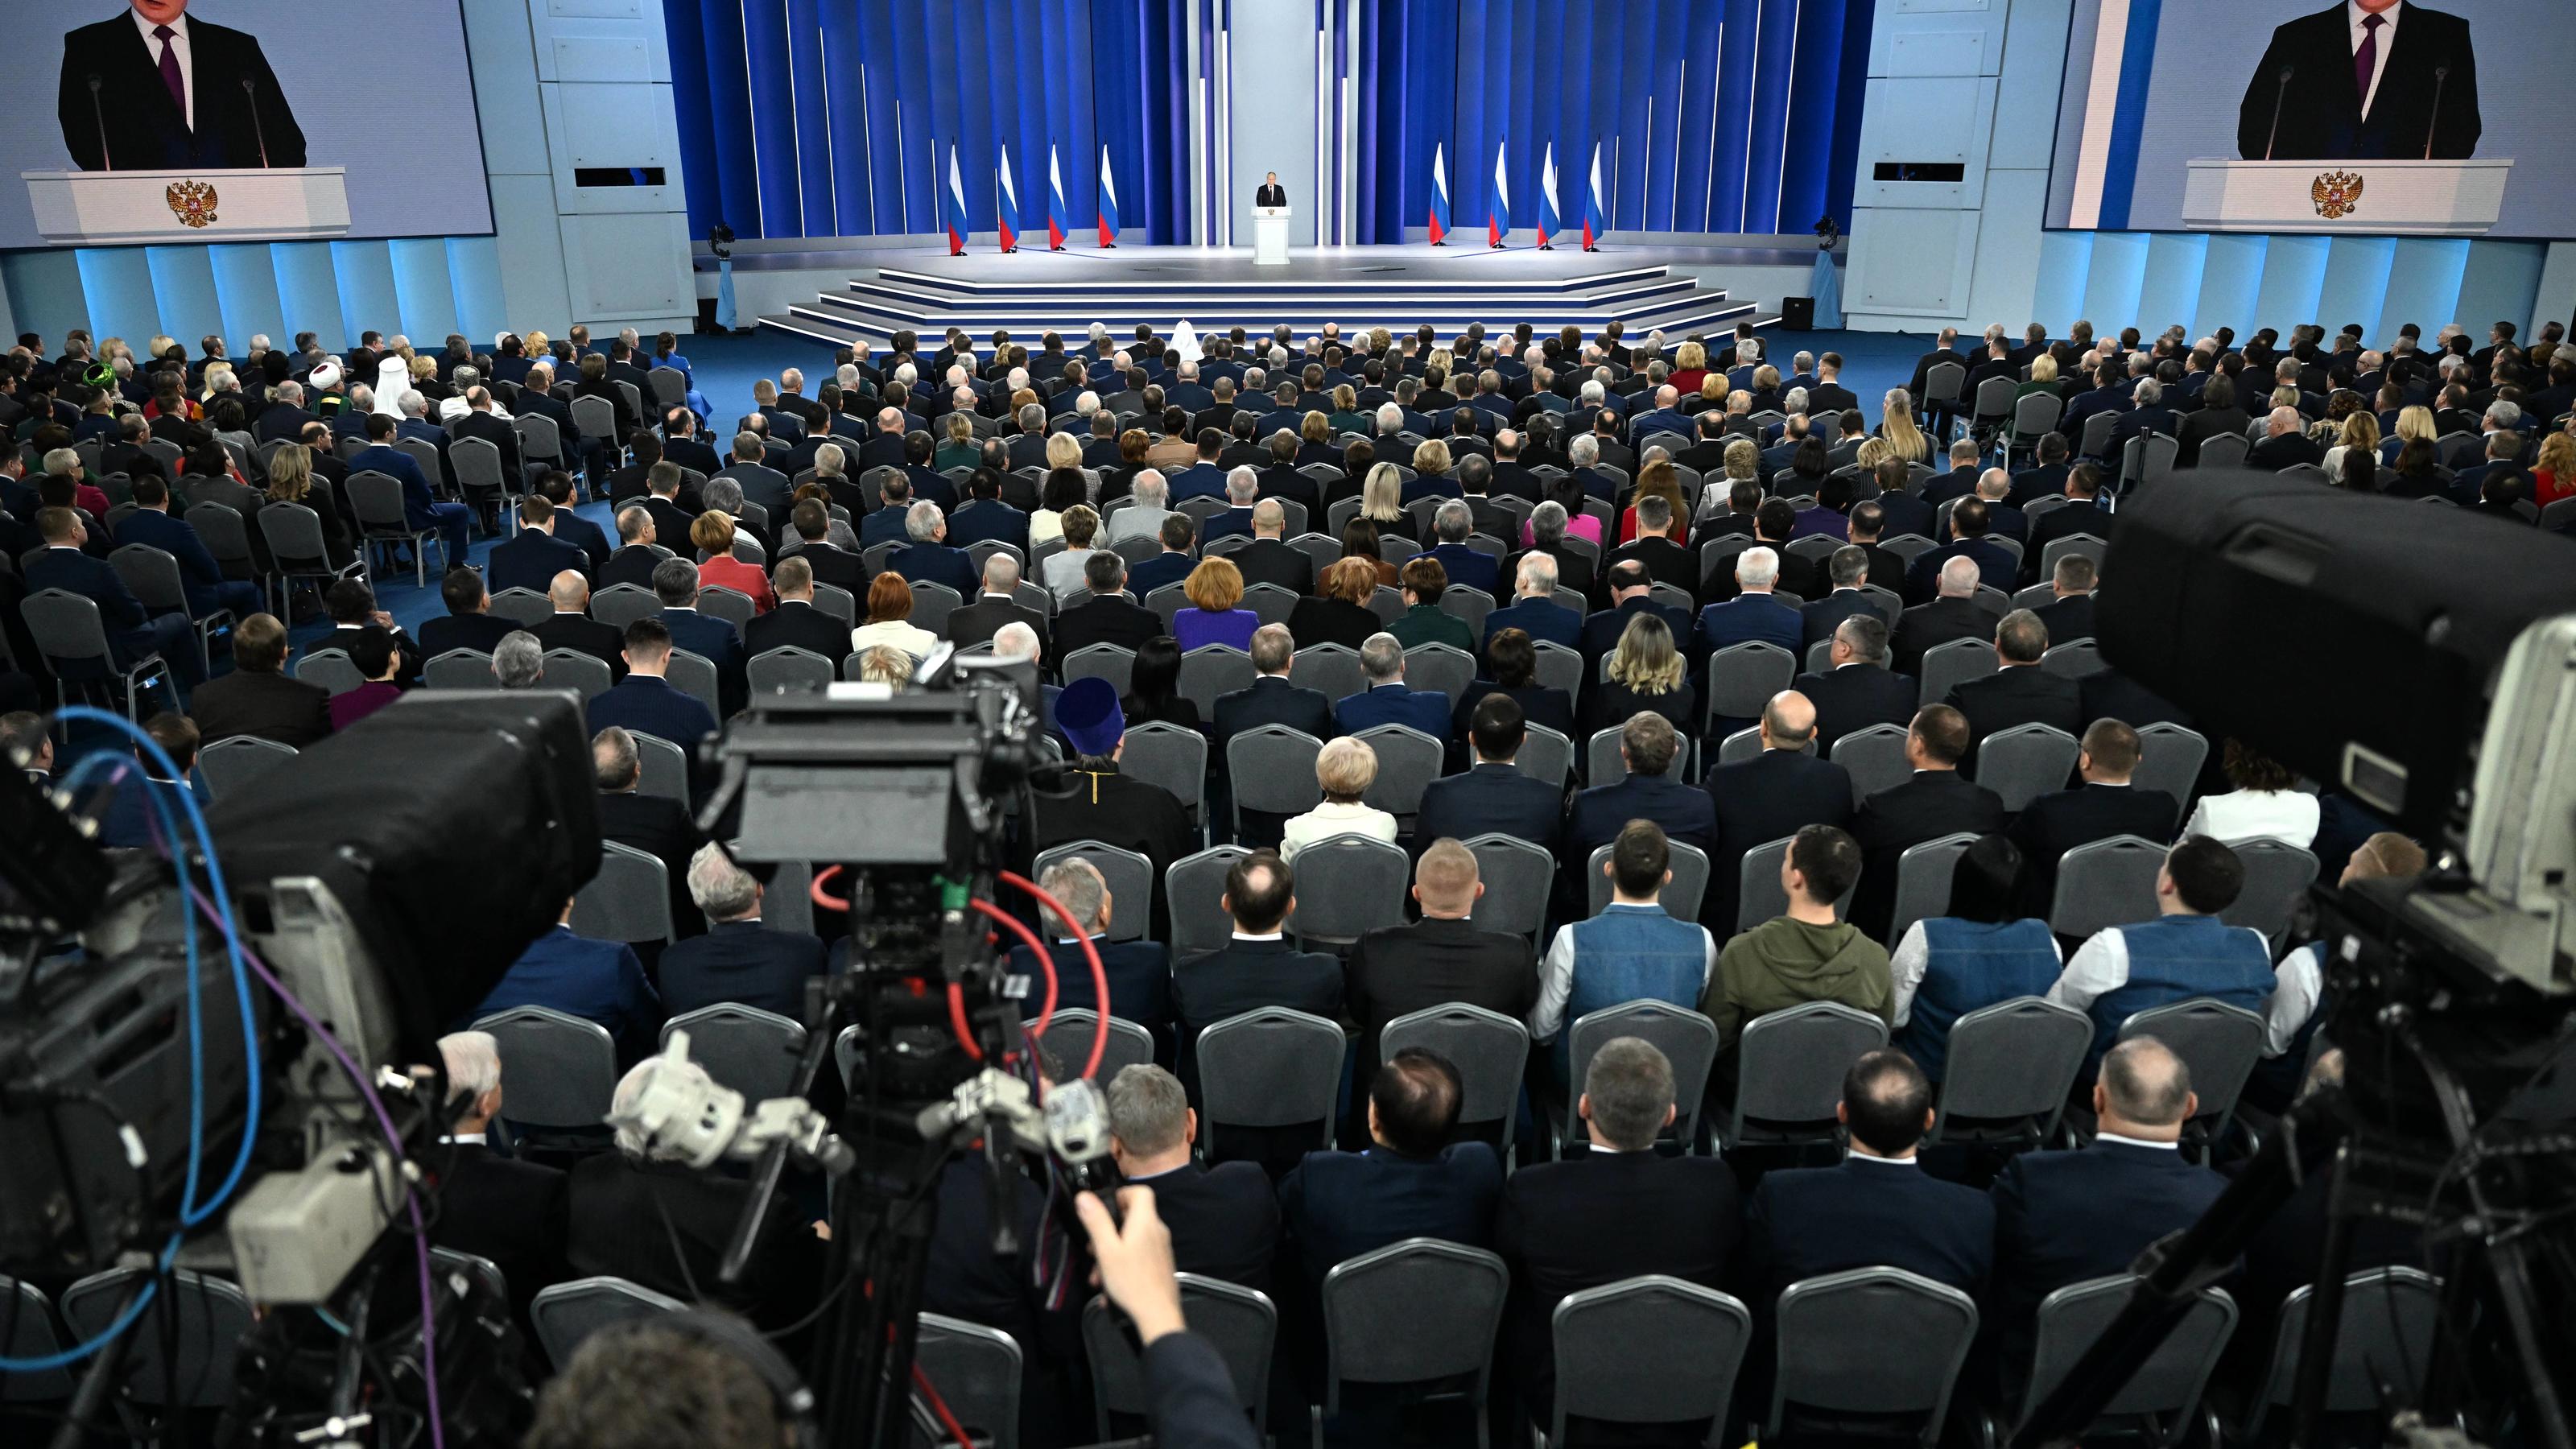 Russia Putin Federal Assembly Address 8374753 21.02.2023 Russian President Vladimir Putin delivers his annual address to the Federal Assembly, including lawmakers of the State Duma, members of the Federation Council, regional governors and other offi